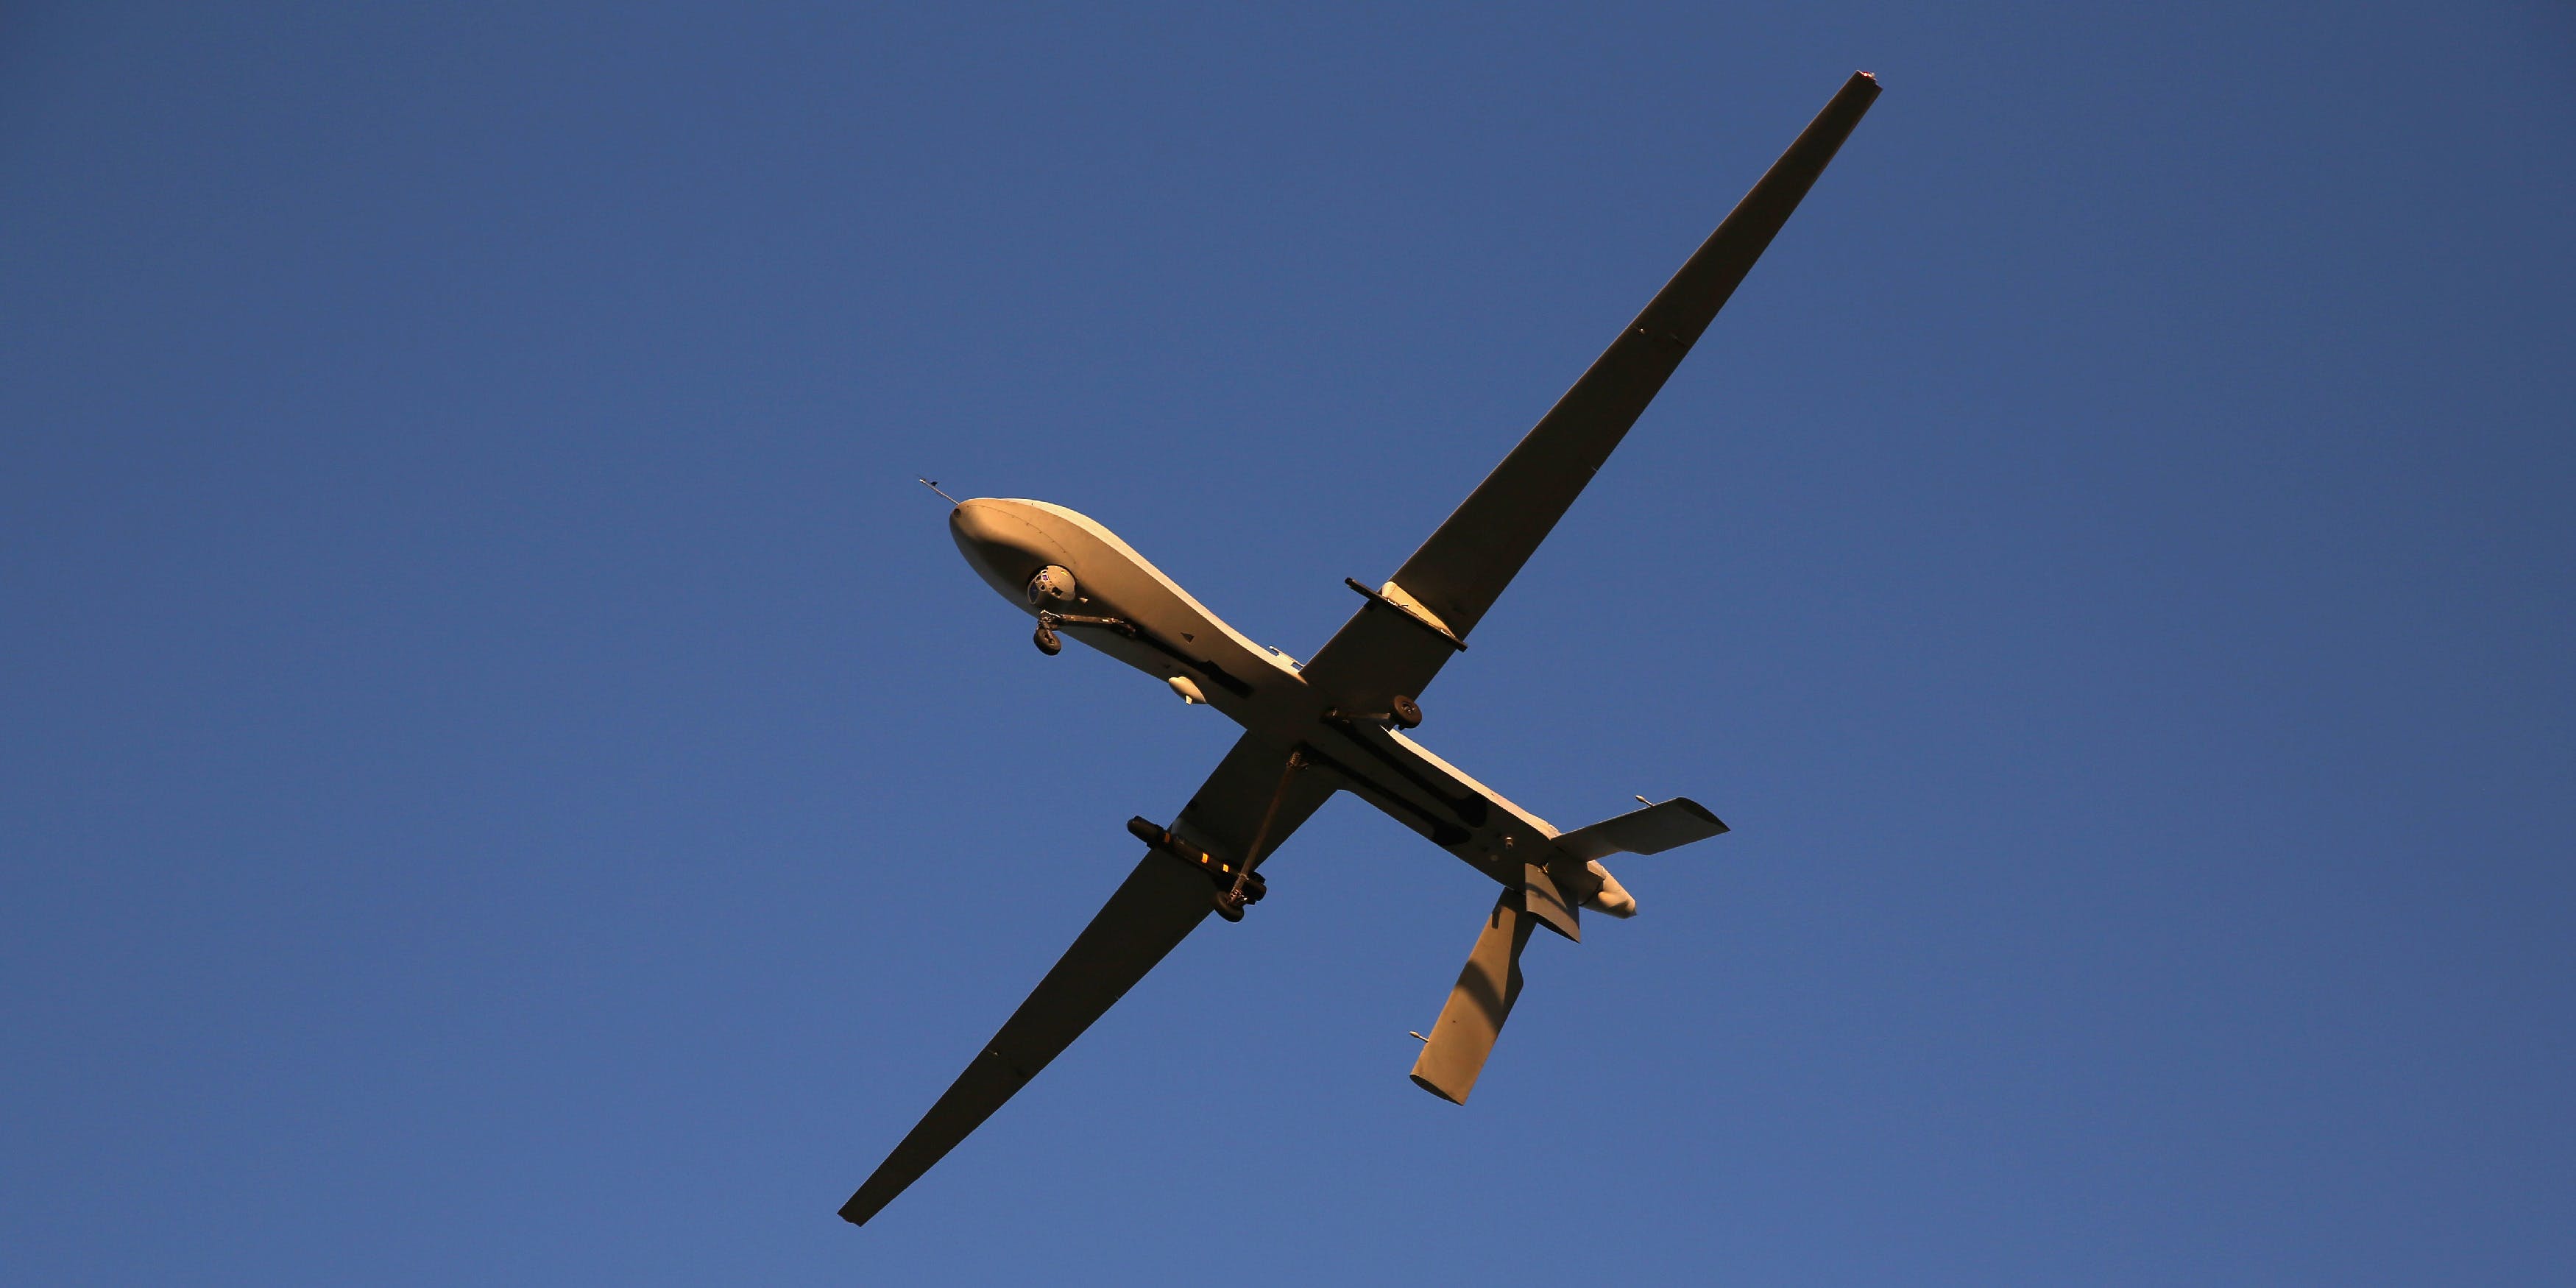 Leaked Emails Show Google Expected Lucrative Military Drone AI Work to Grow Exponentially